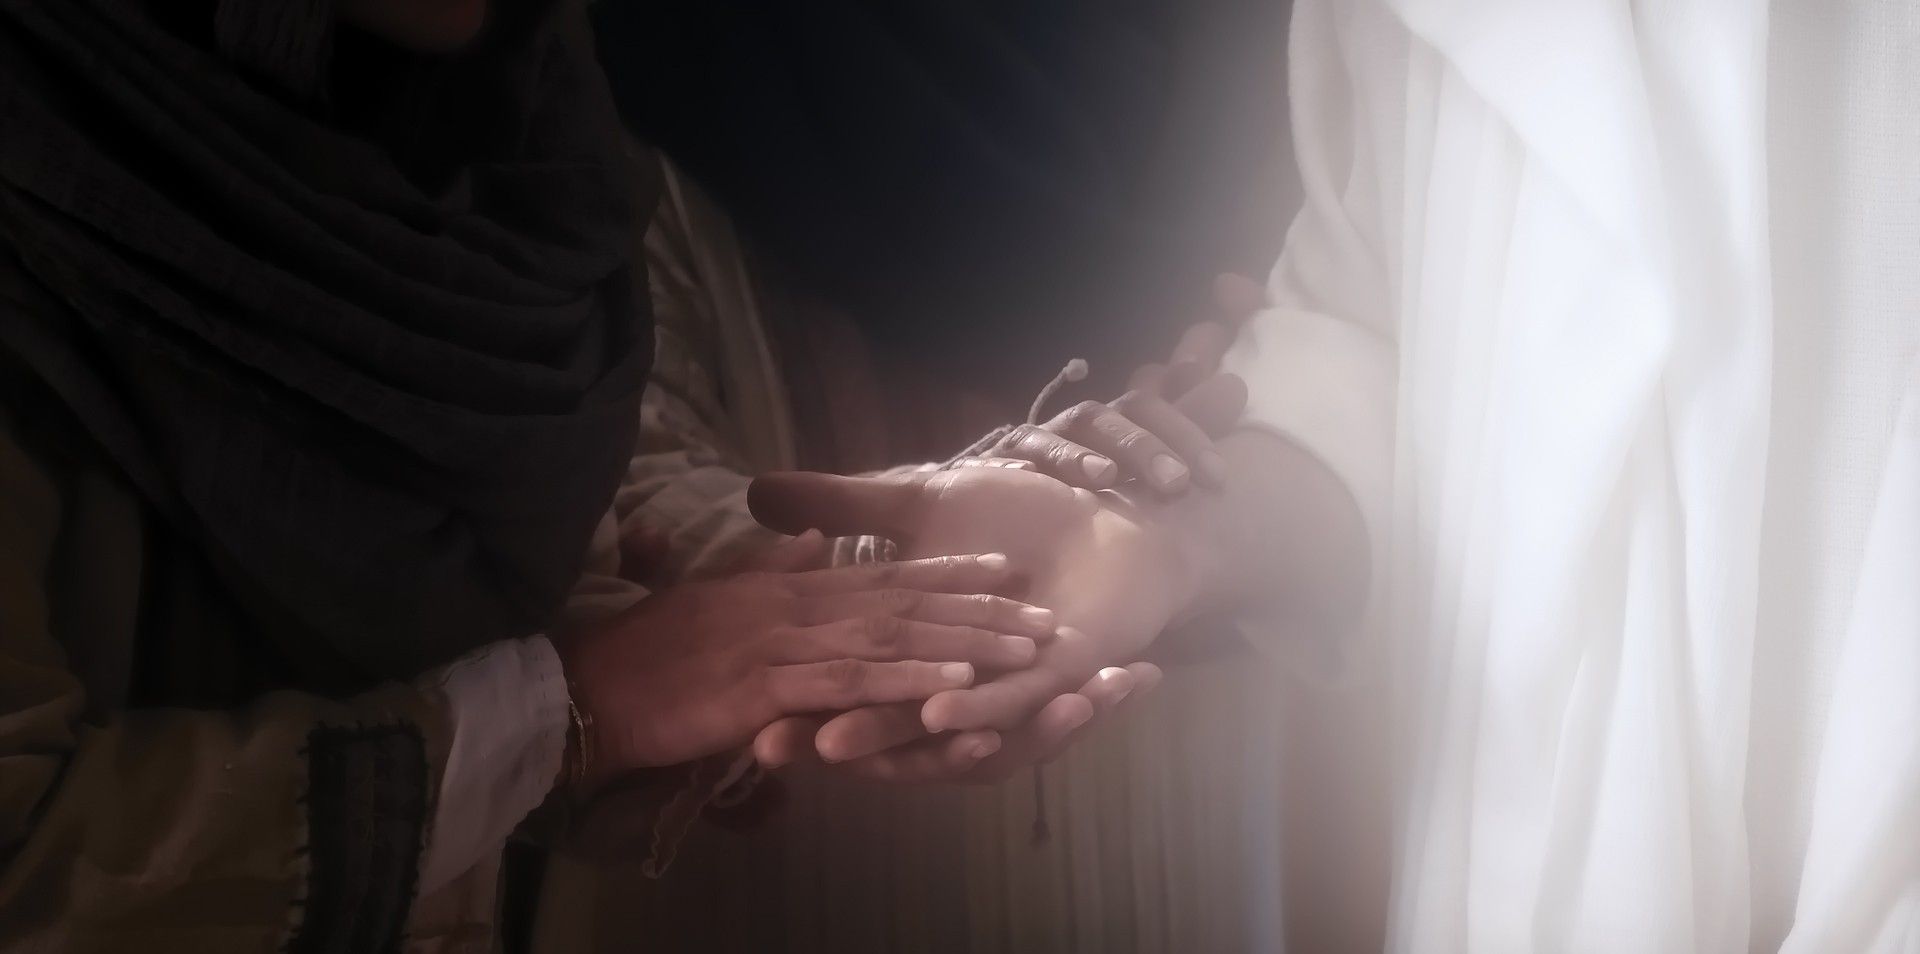 The resurrected Christ invites others to feel His hands.